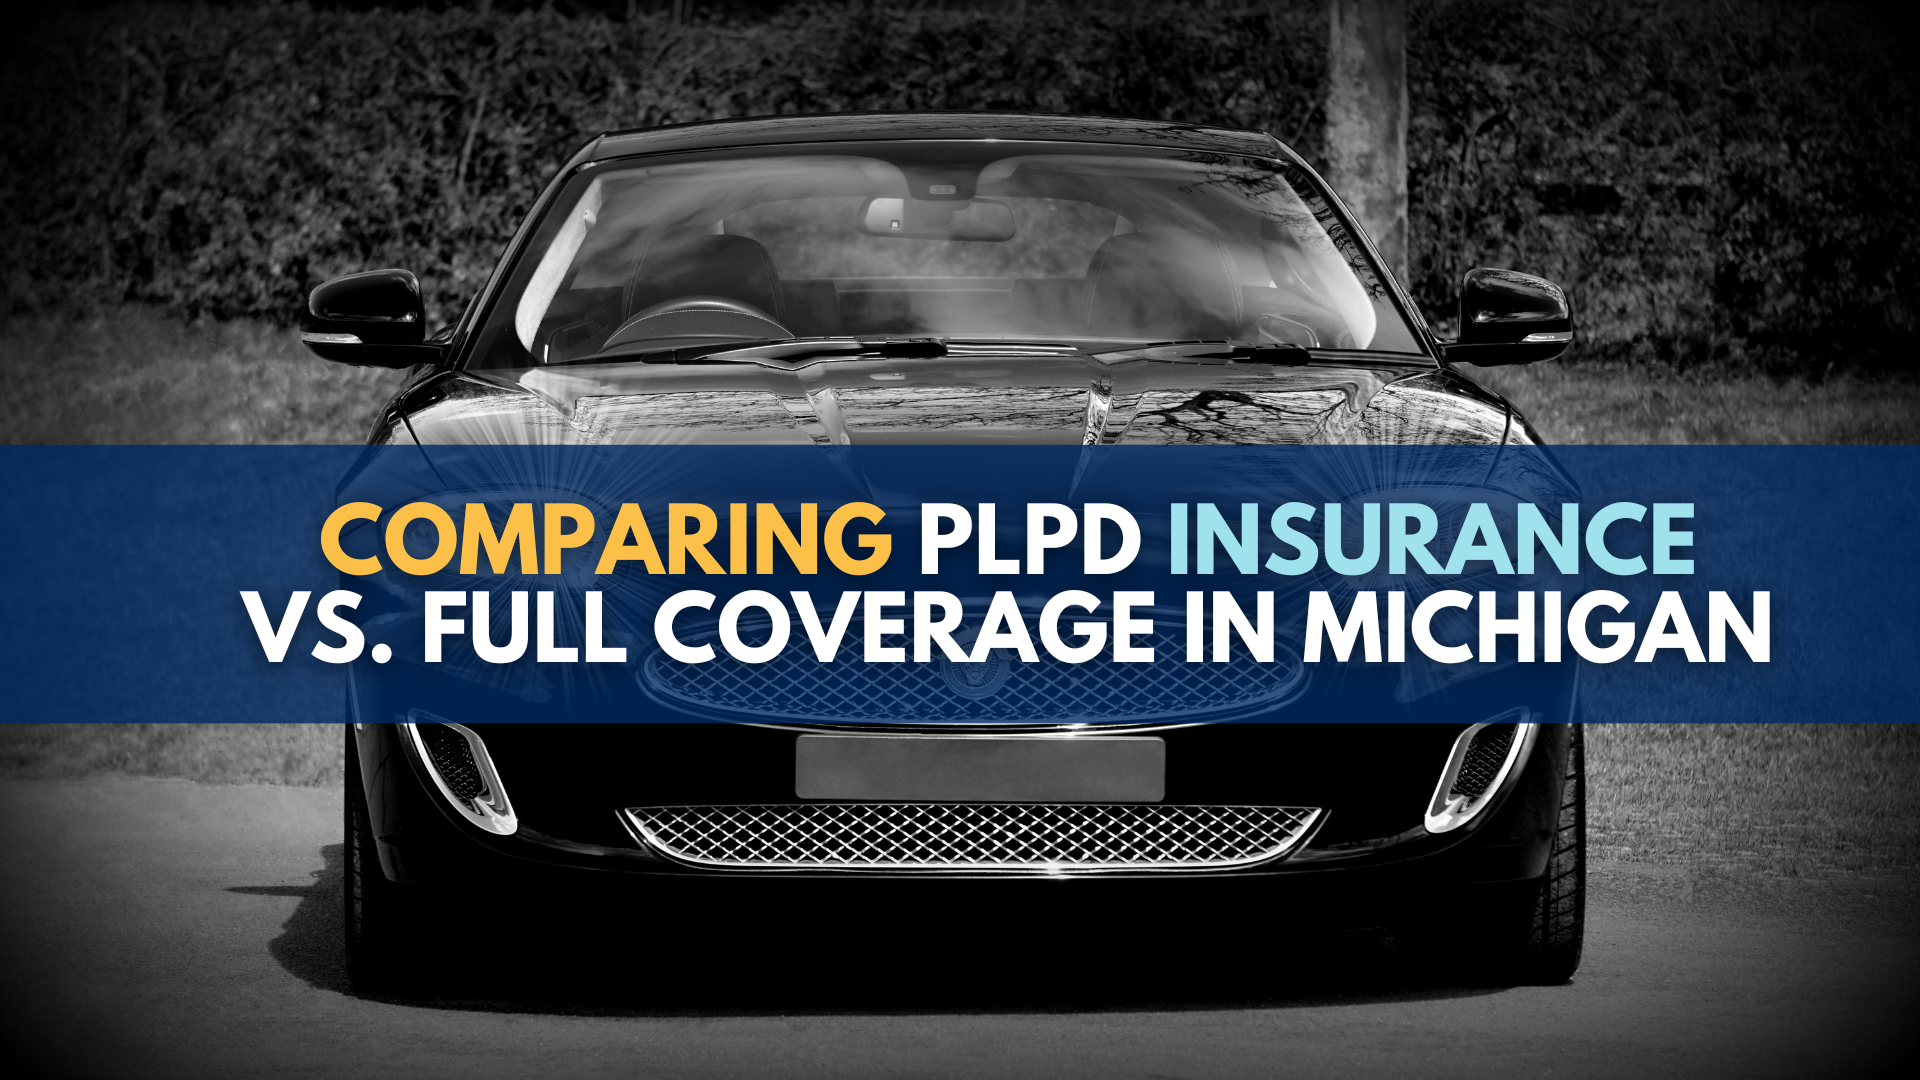 PLPD vs Full Coverage: What Is The Difference?